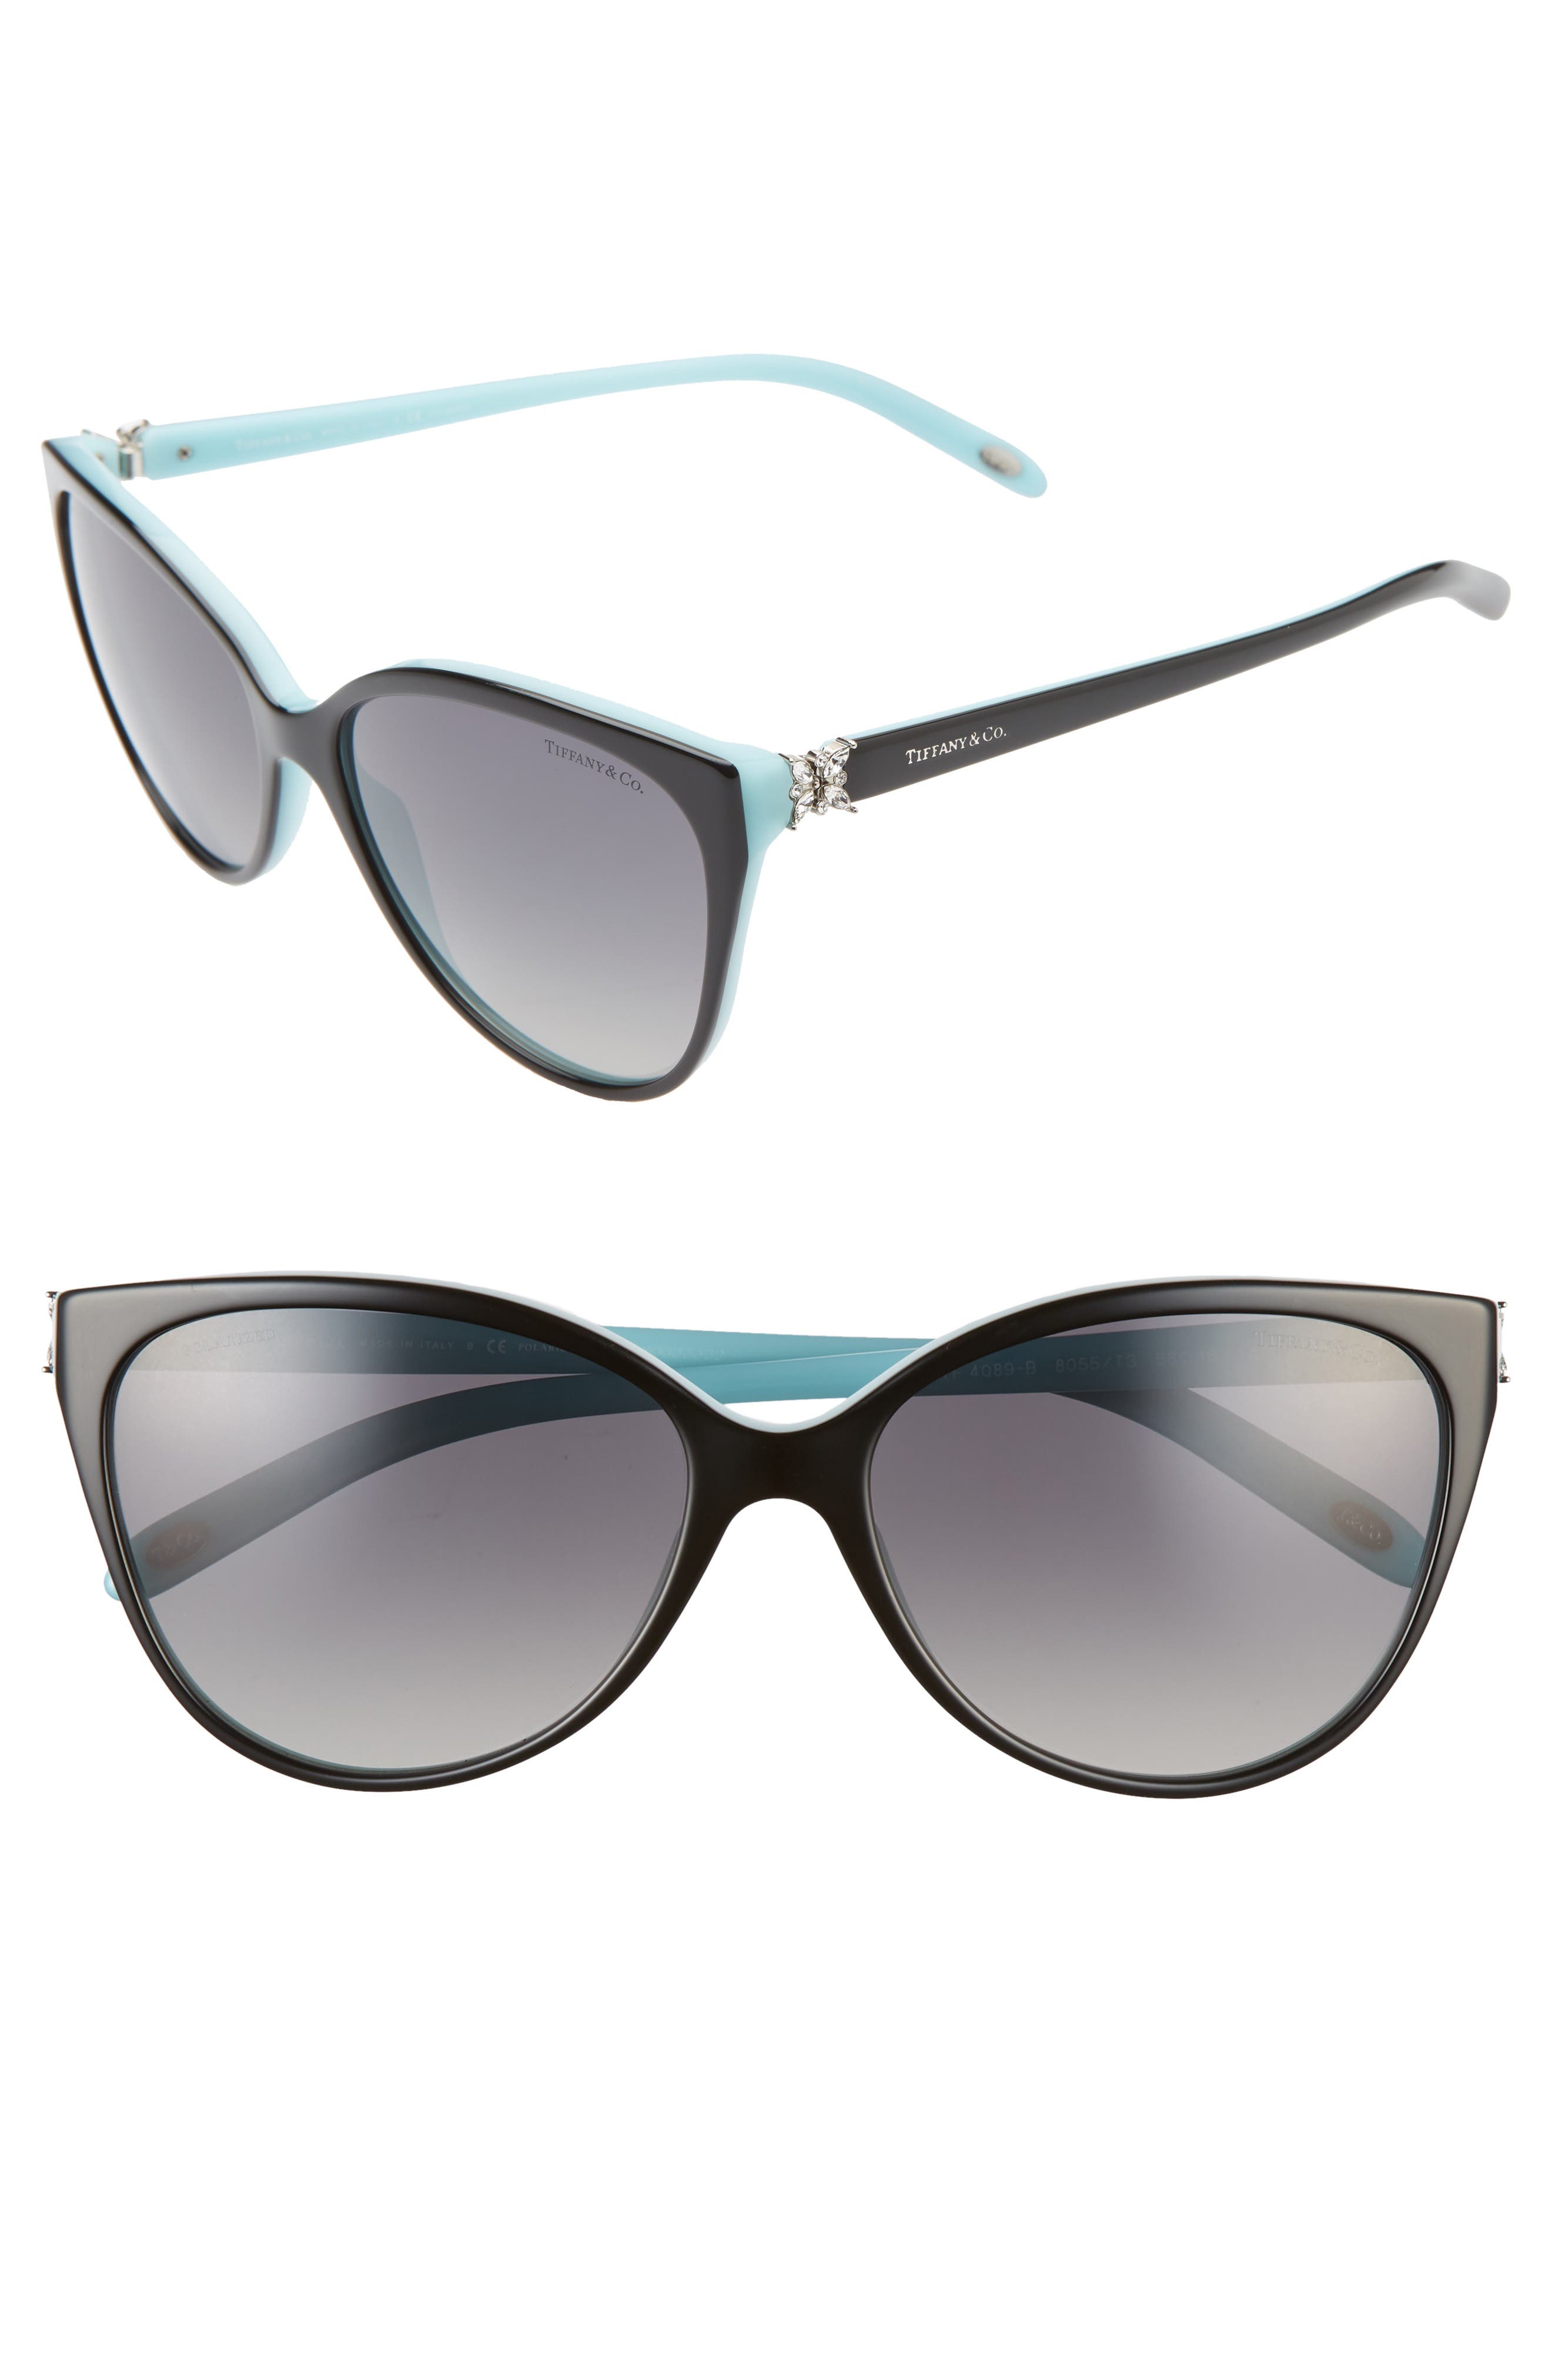 tiffany sunglasses with flower on side